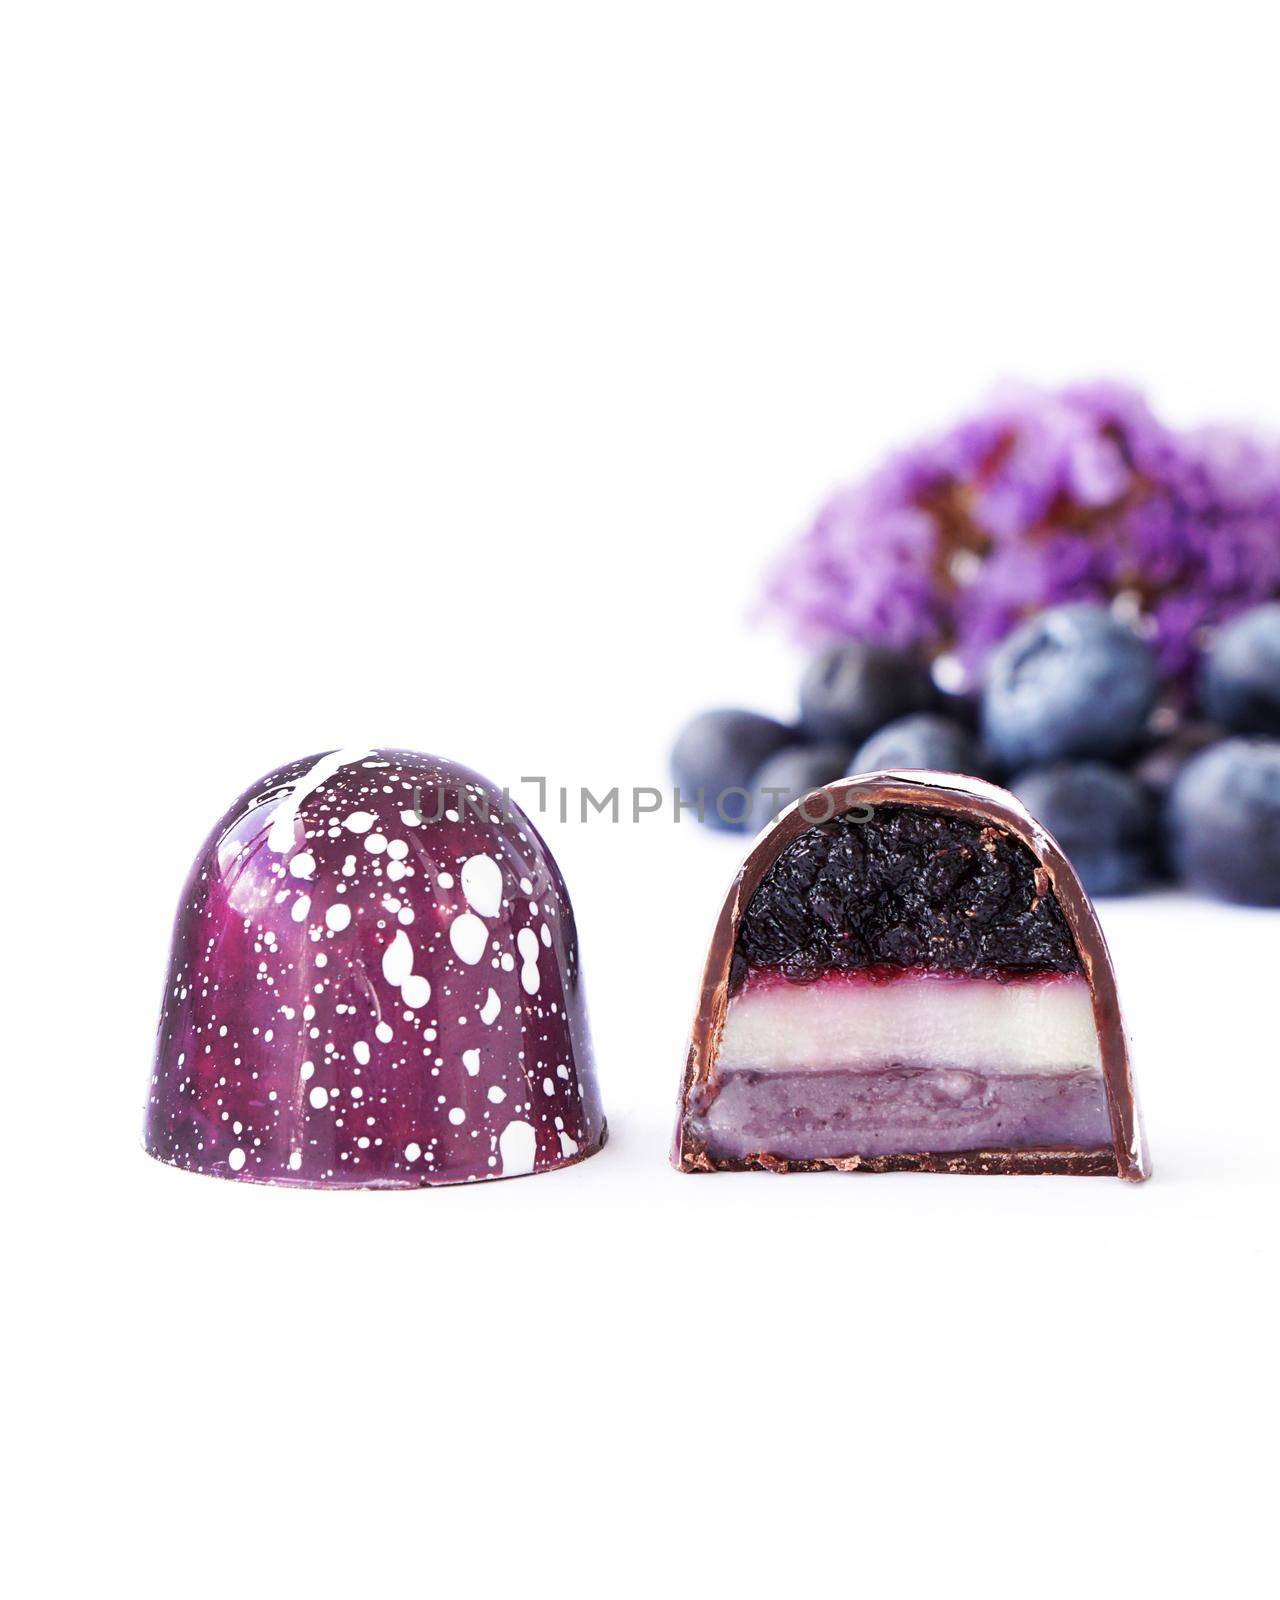 Chocolate candy in a cut on a white background. Blueberry and lavender by natali_brill